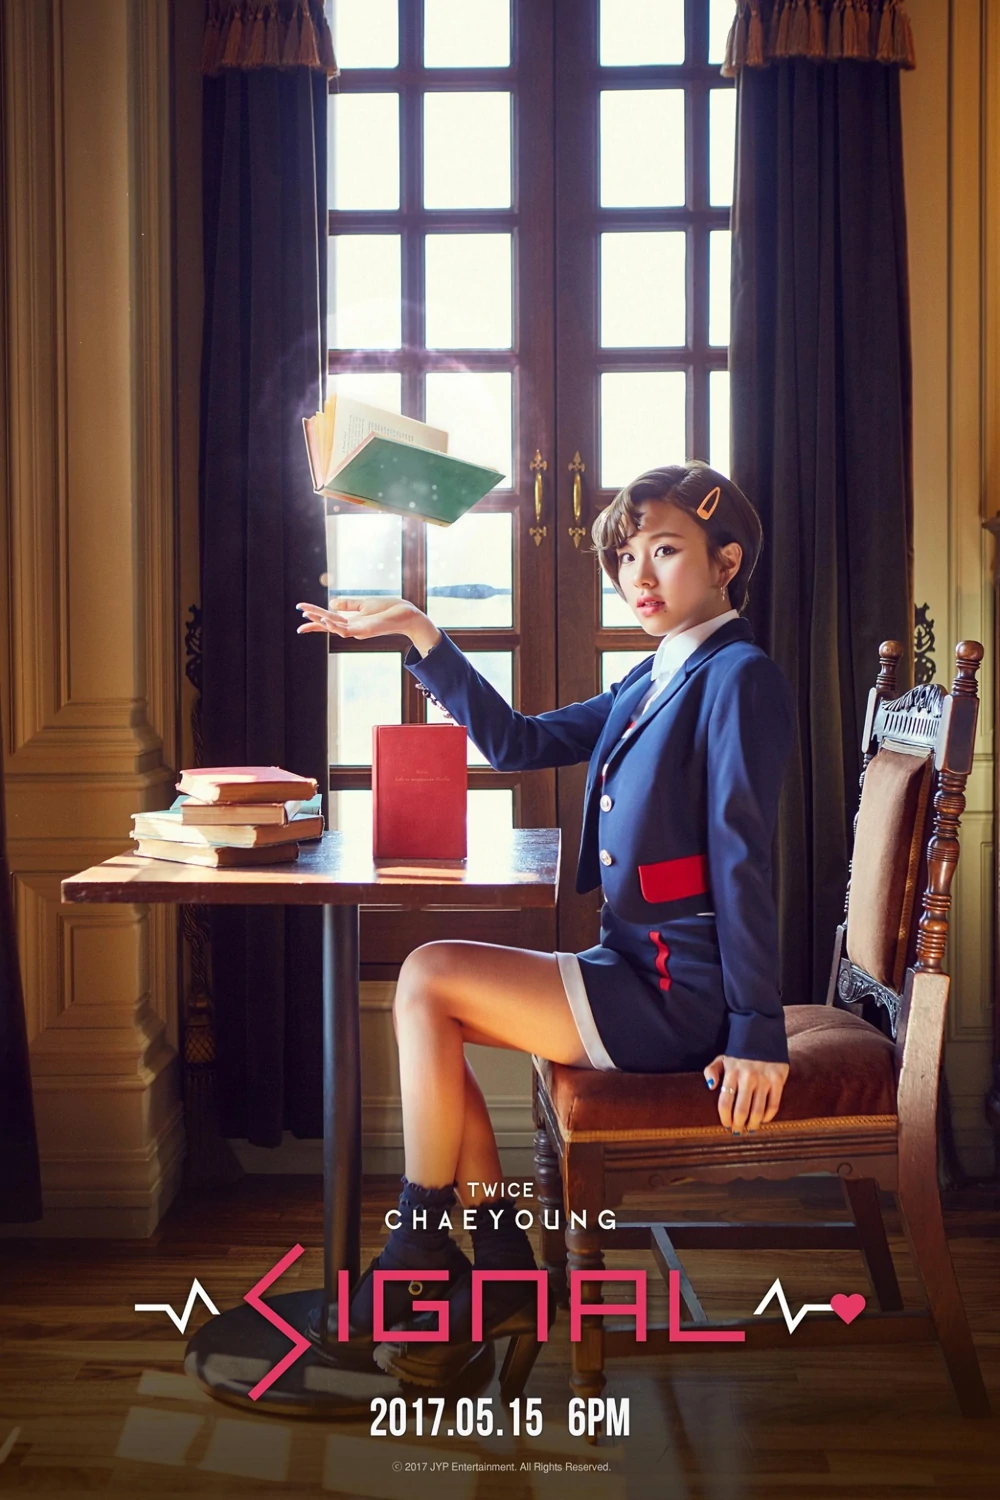 Twice Signal Chaeyoung Concept Teaser Picture Image Photo Kpop K-Concept 2